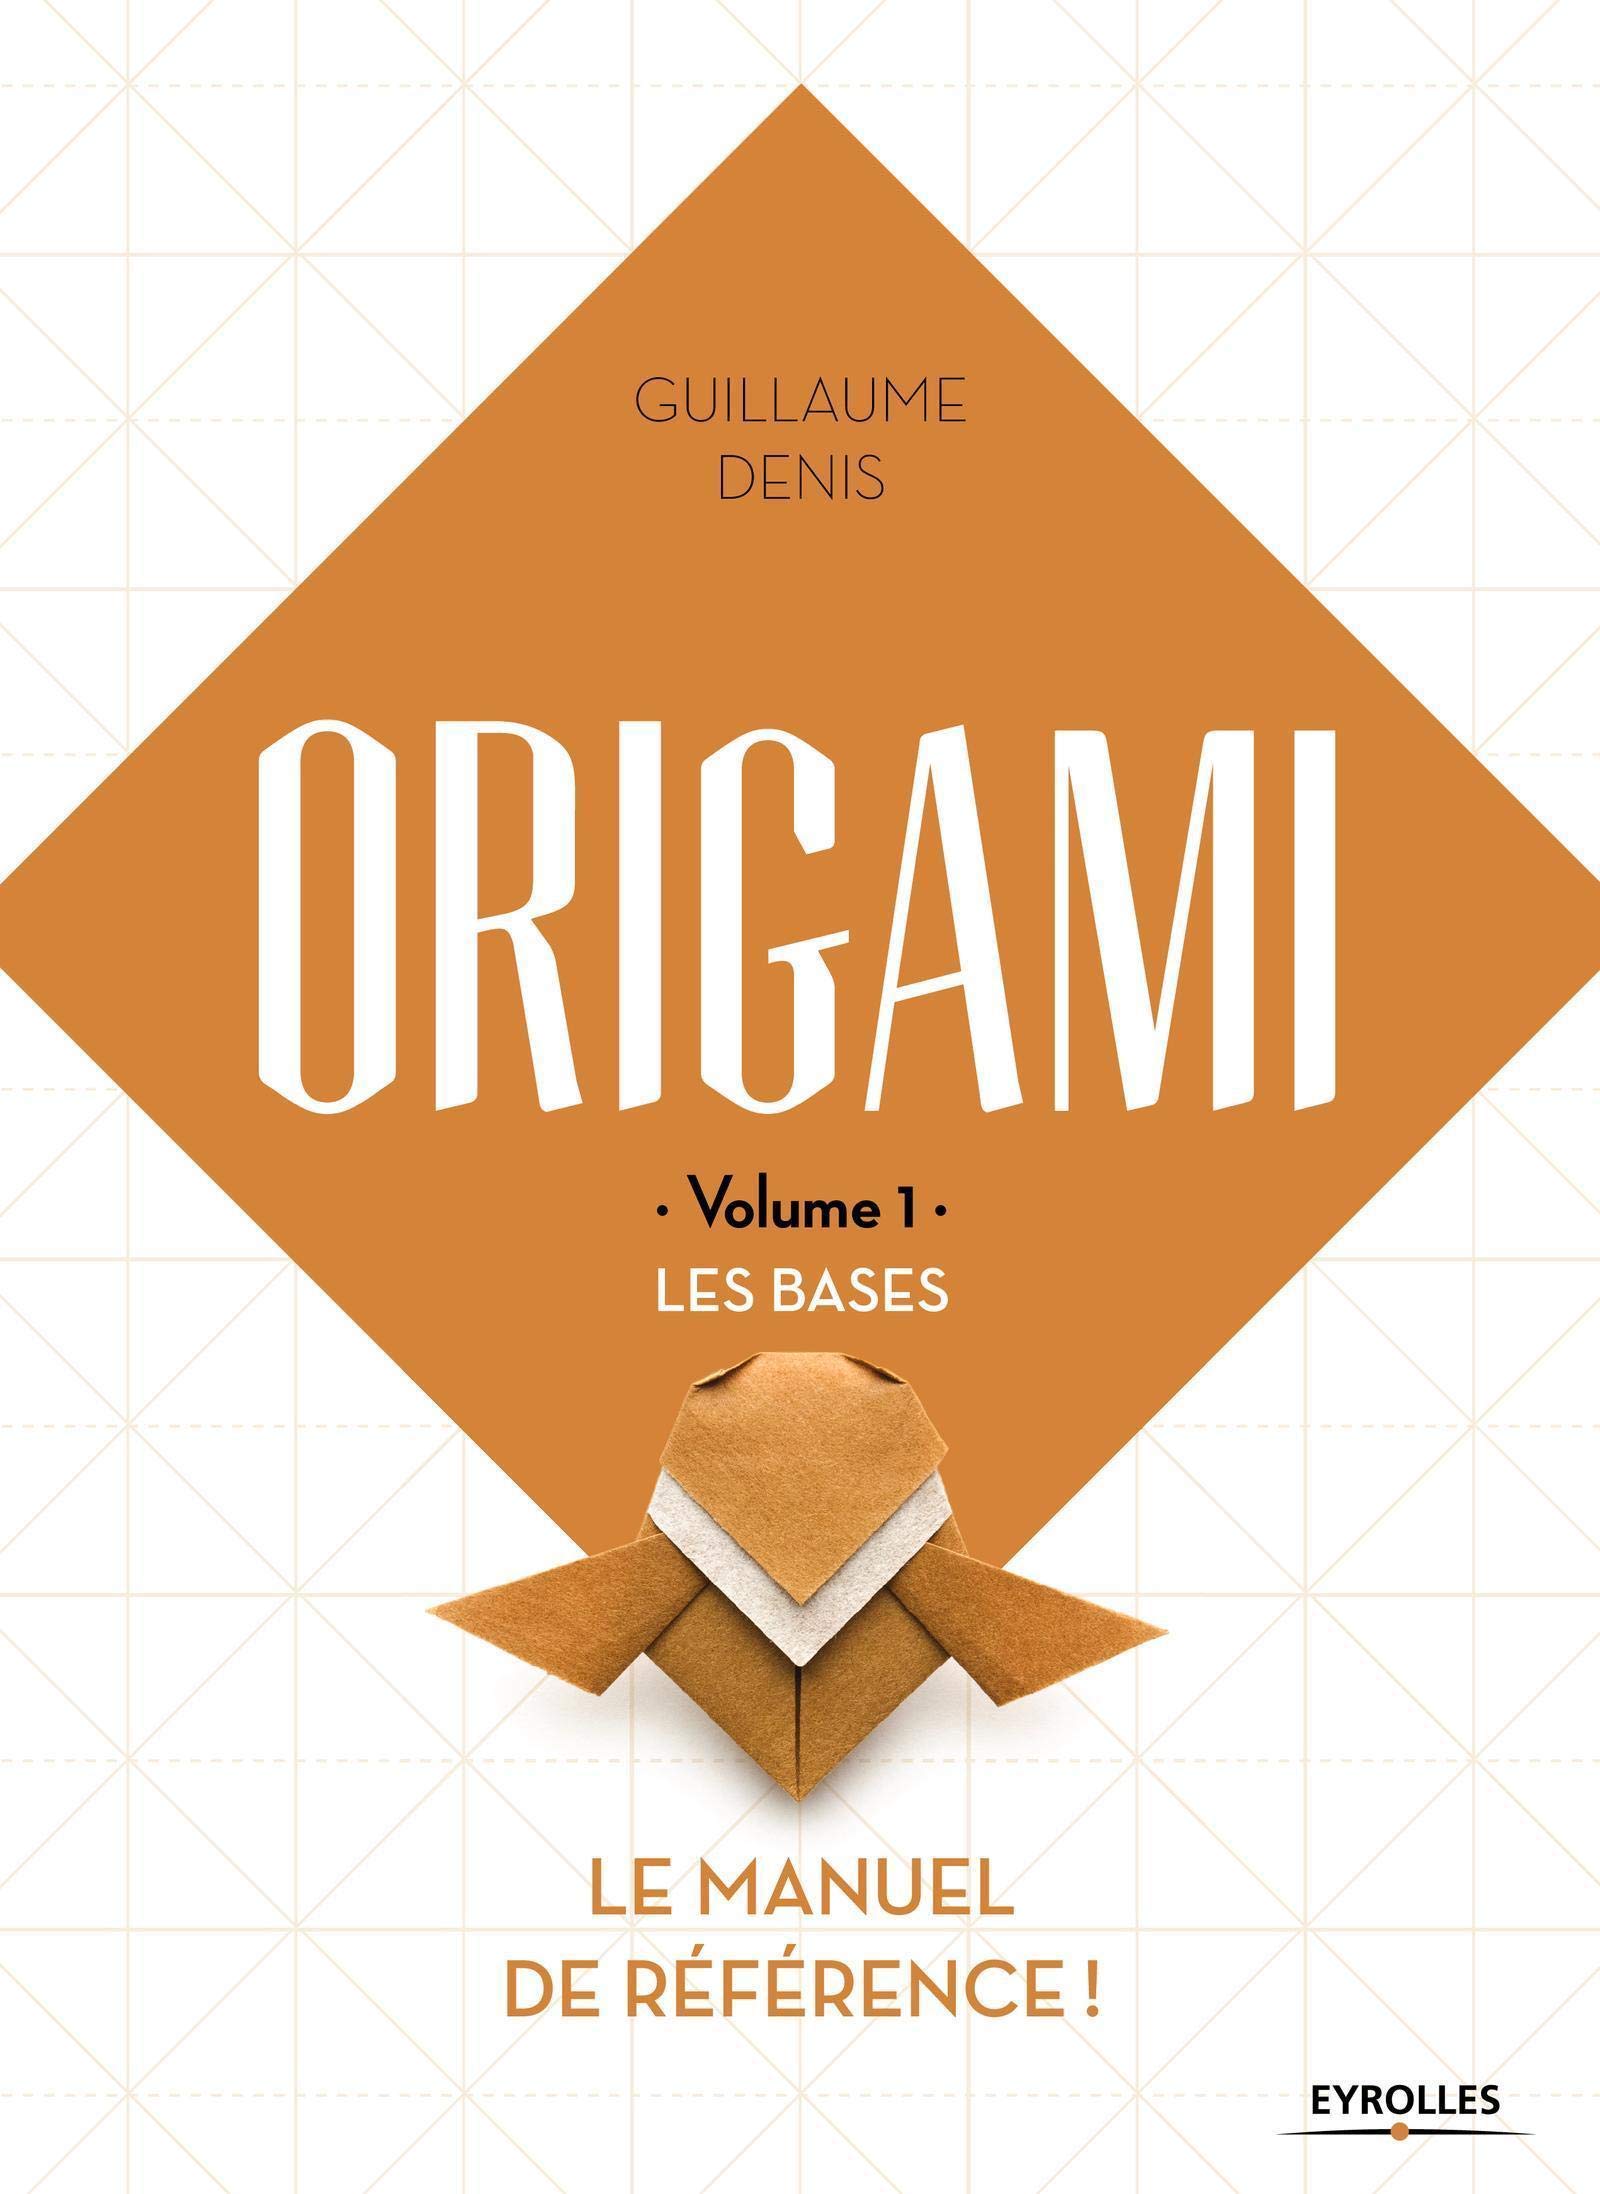 ORIGAMI - Volume 1 - LES BASES : page 69.